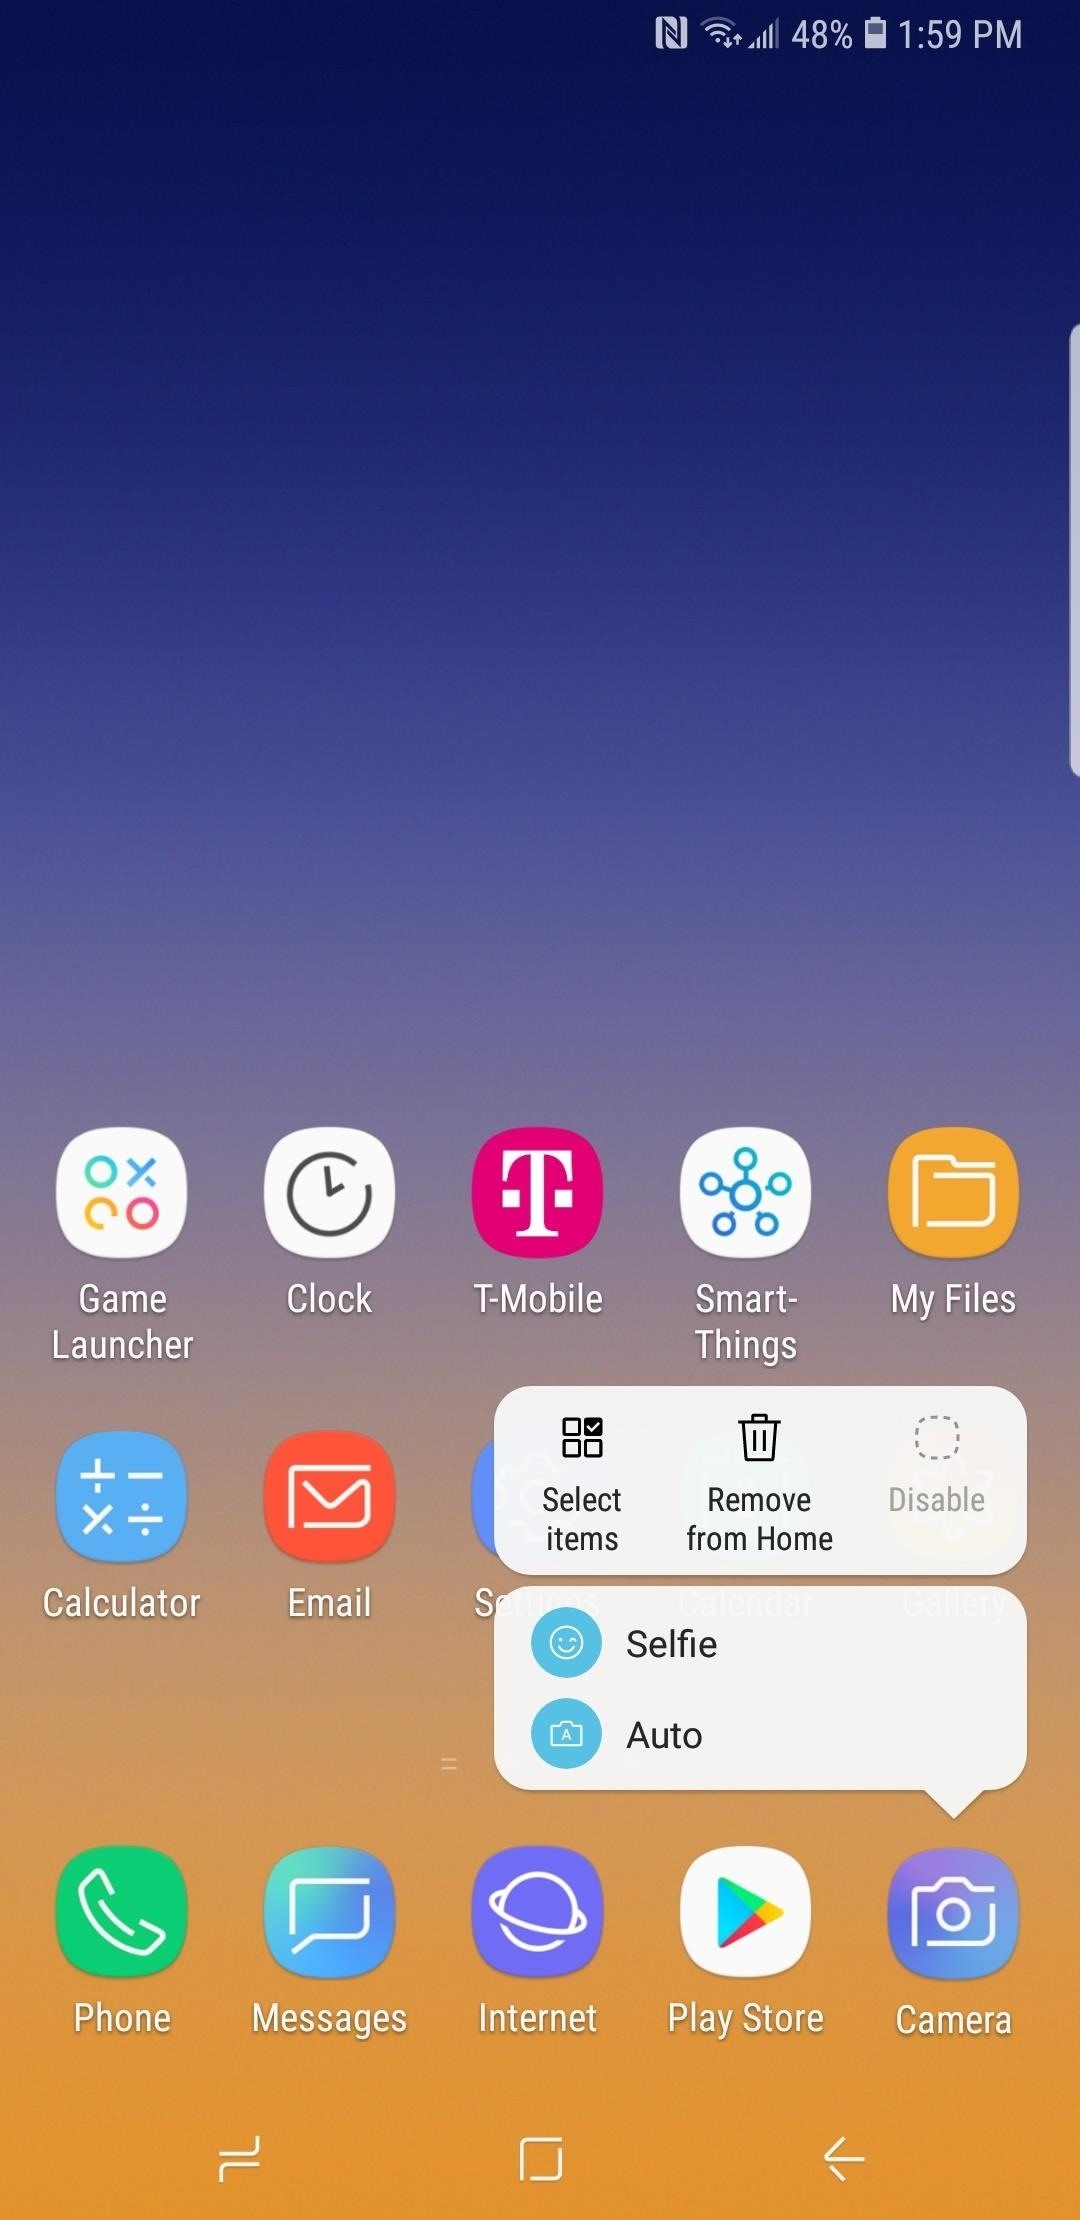 Samsung Android Pie Update: Galaxy Devices Are Getting All-New Home Screen Icons